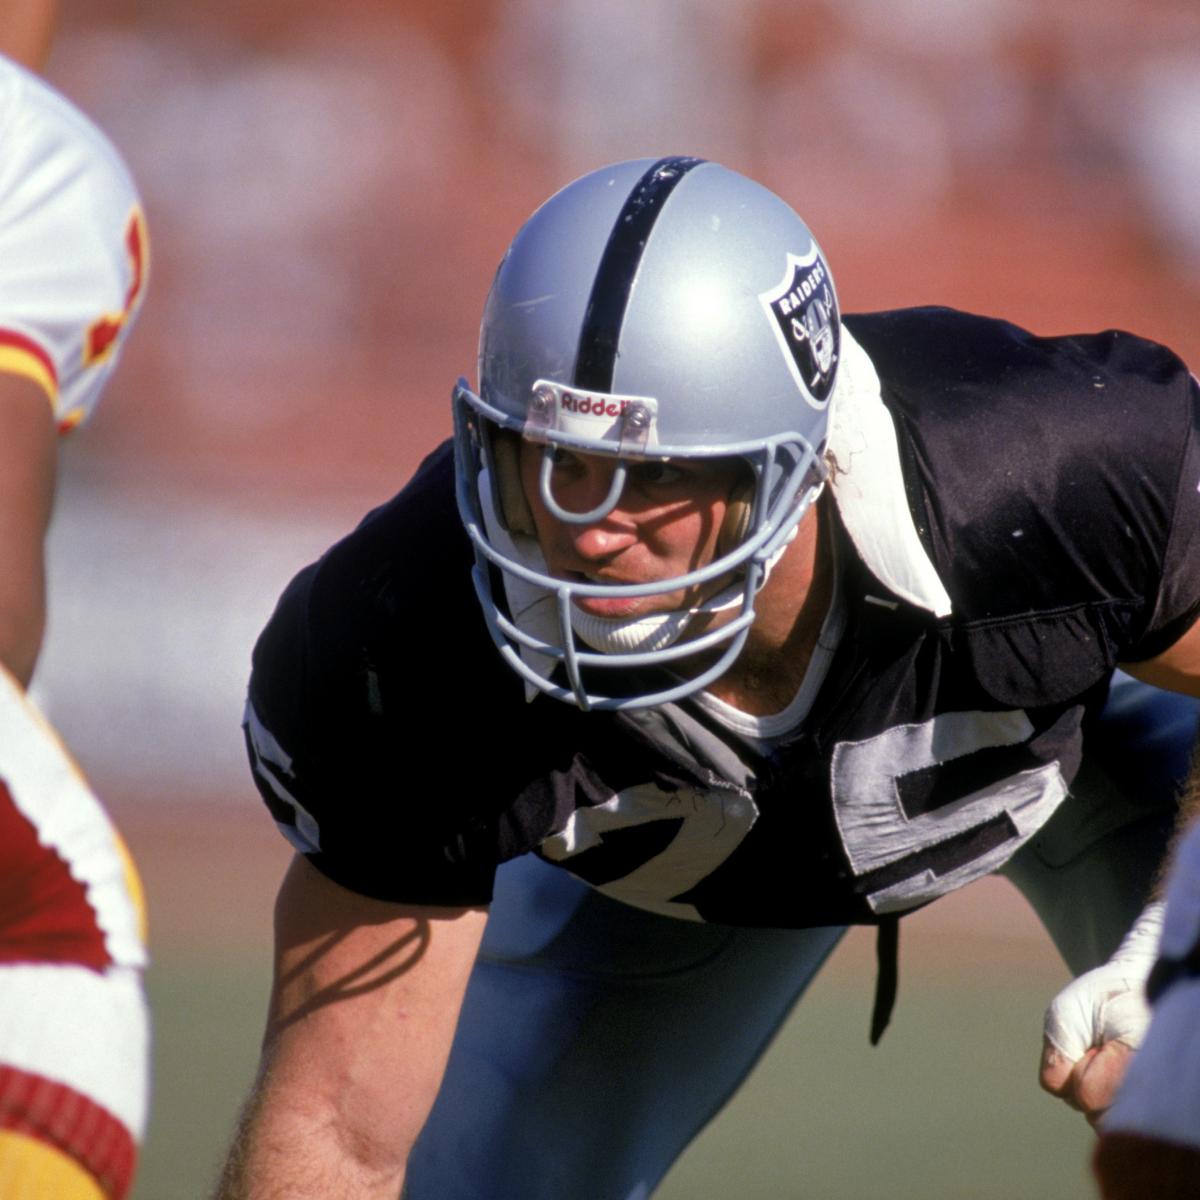 Raiders great Lester Hayes still waiting for Hall of Fame call, Raiders  News